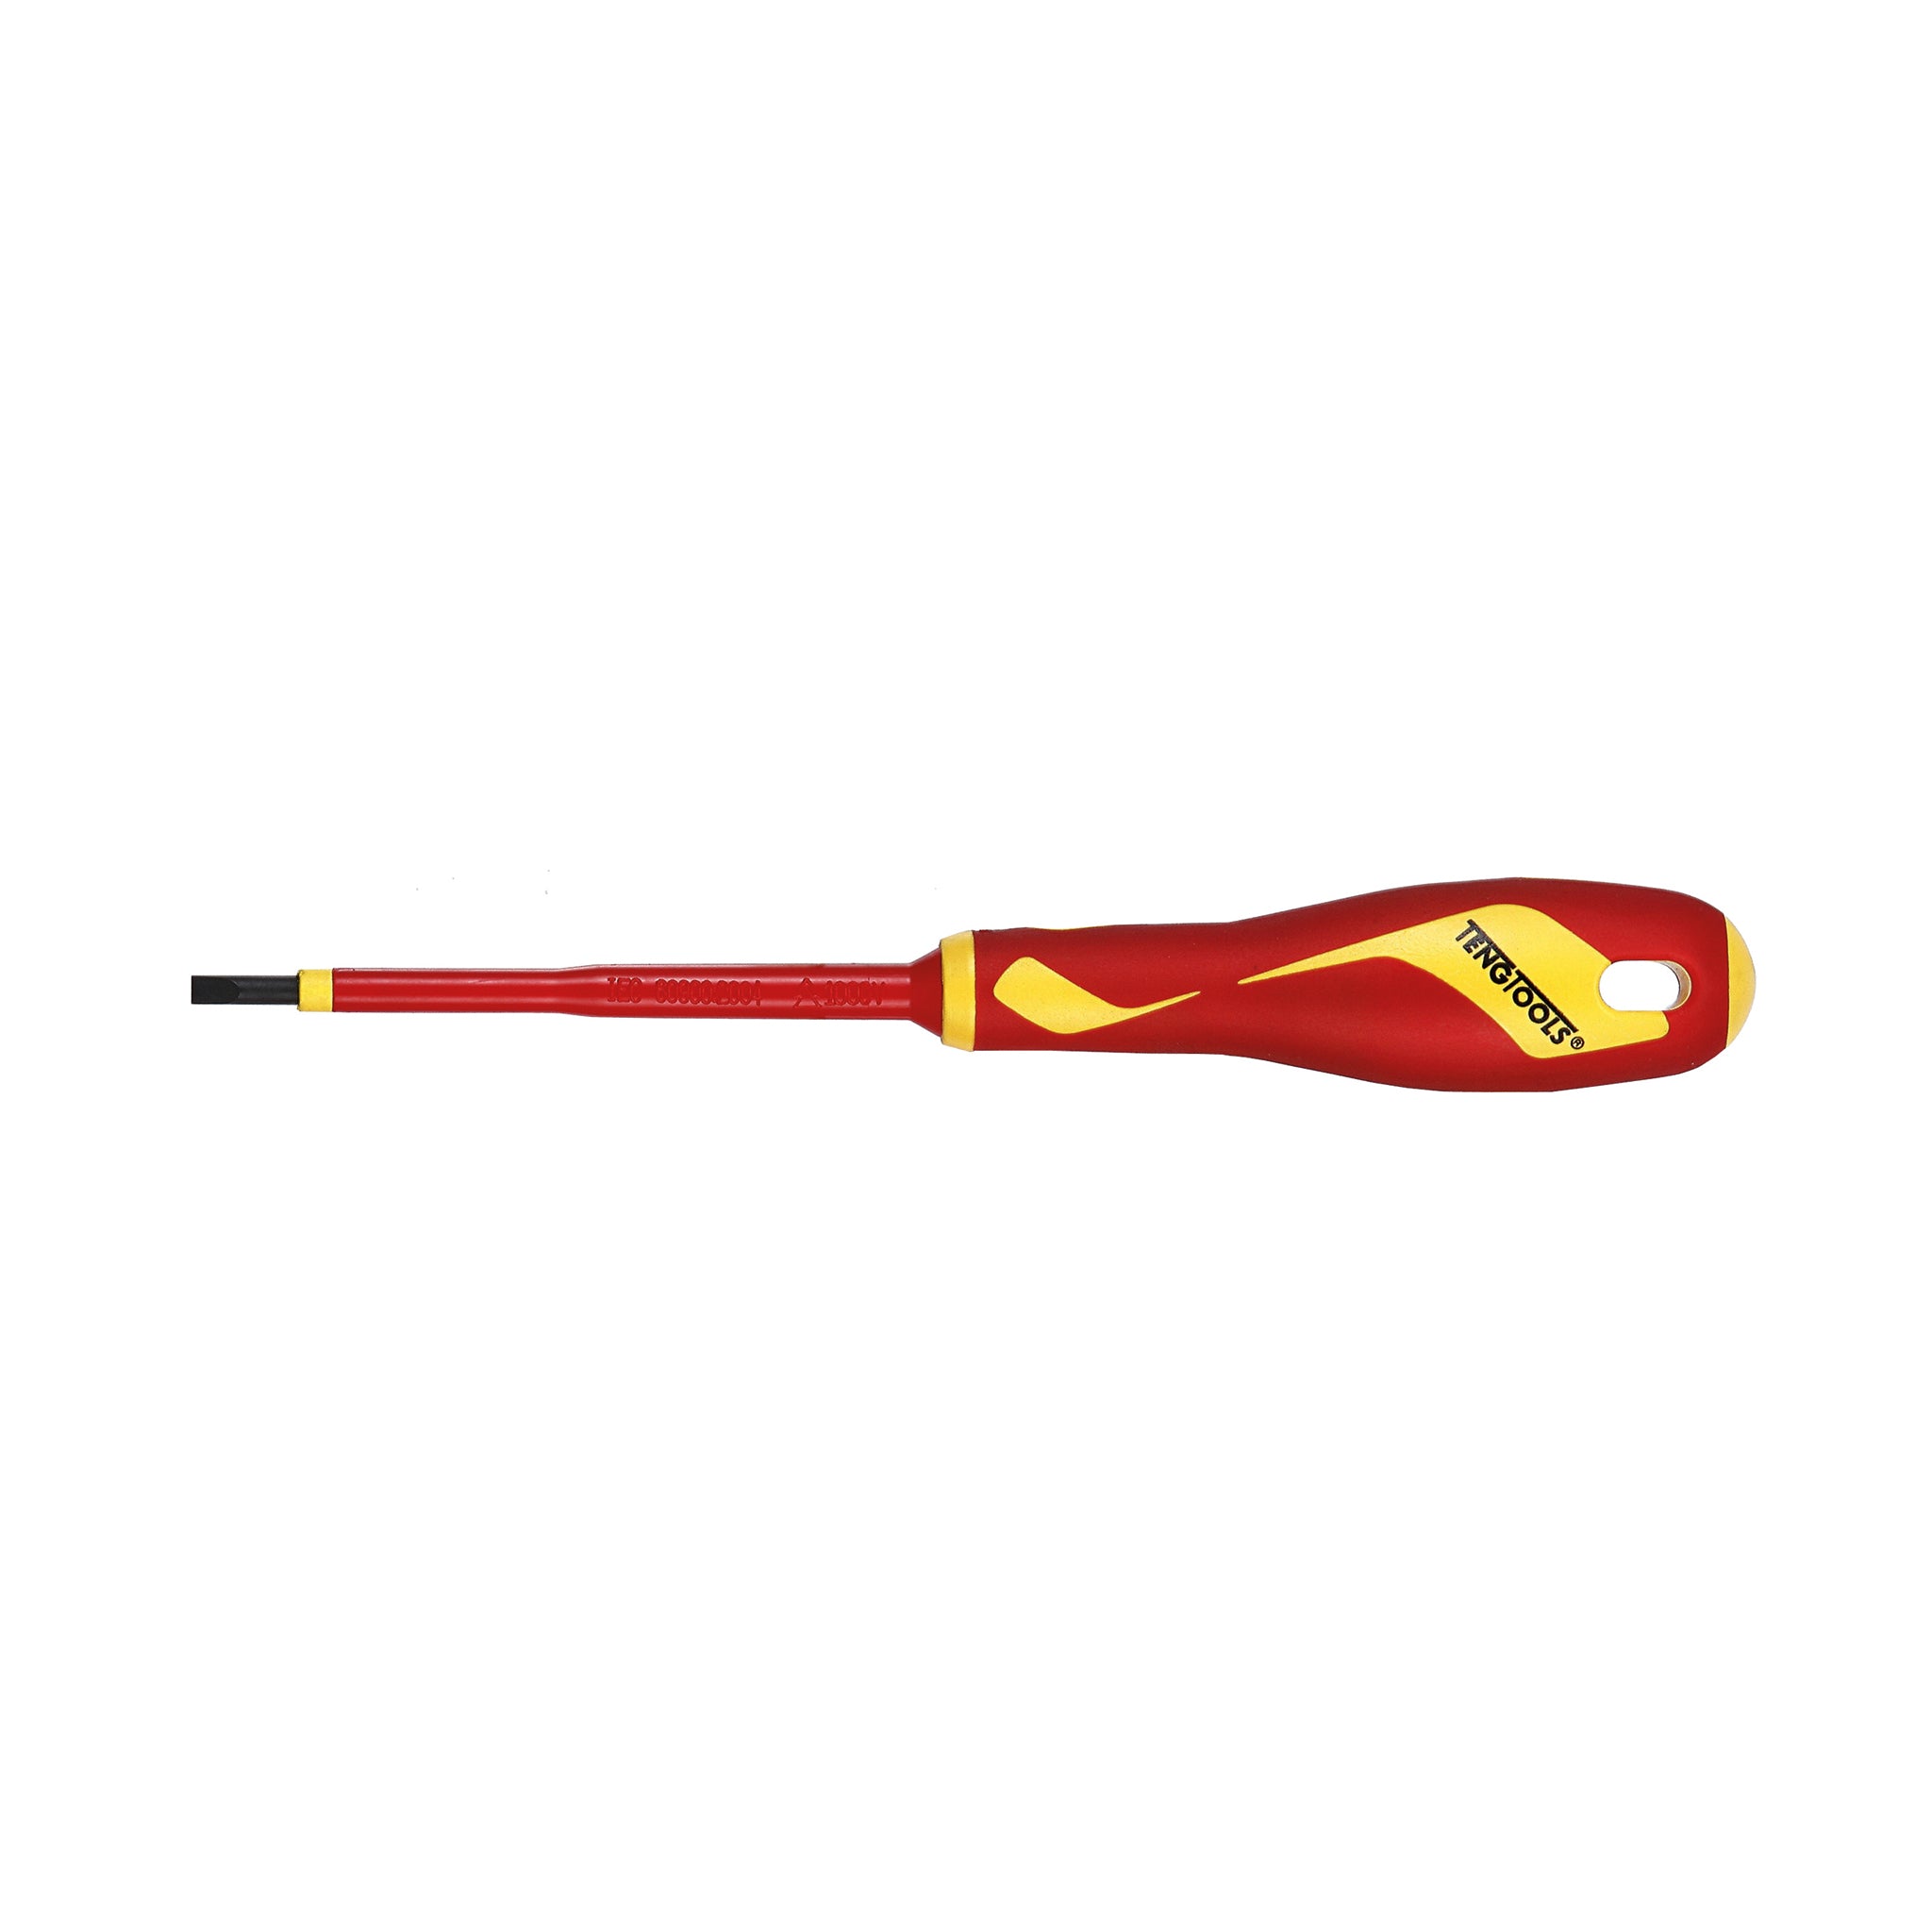 Insulated Flat Slotted Head 1000 Volt VDE Individually Tested And Certified Screwdrivers - 1.2x6.5X150